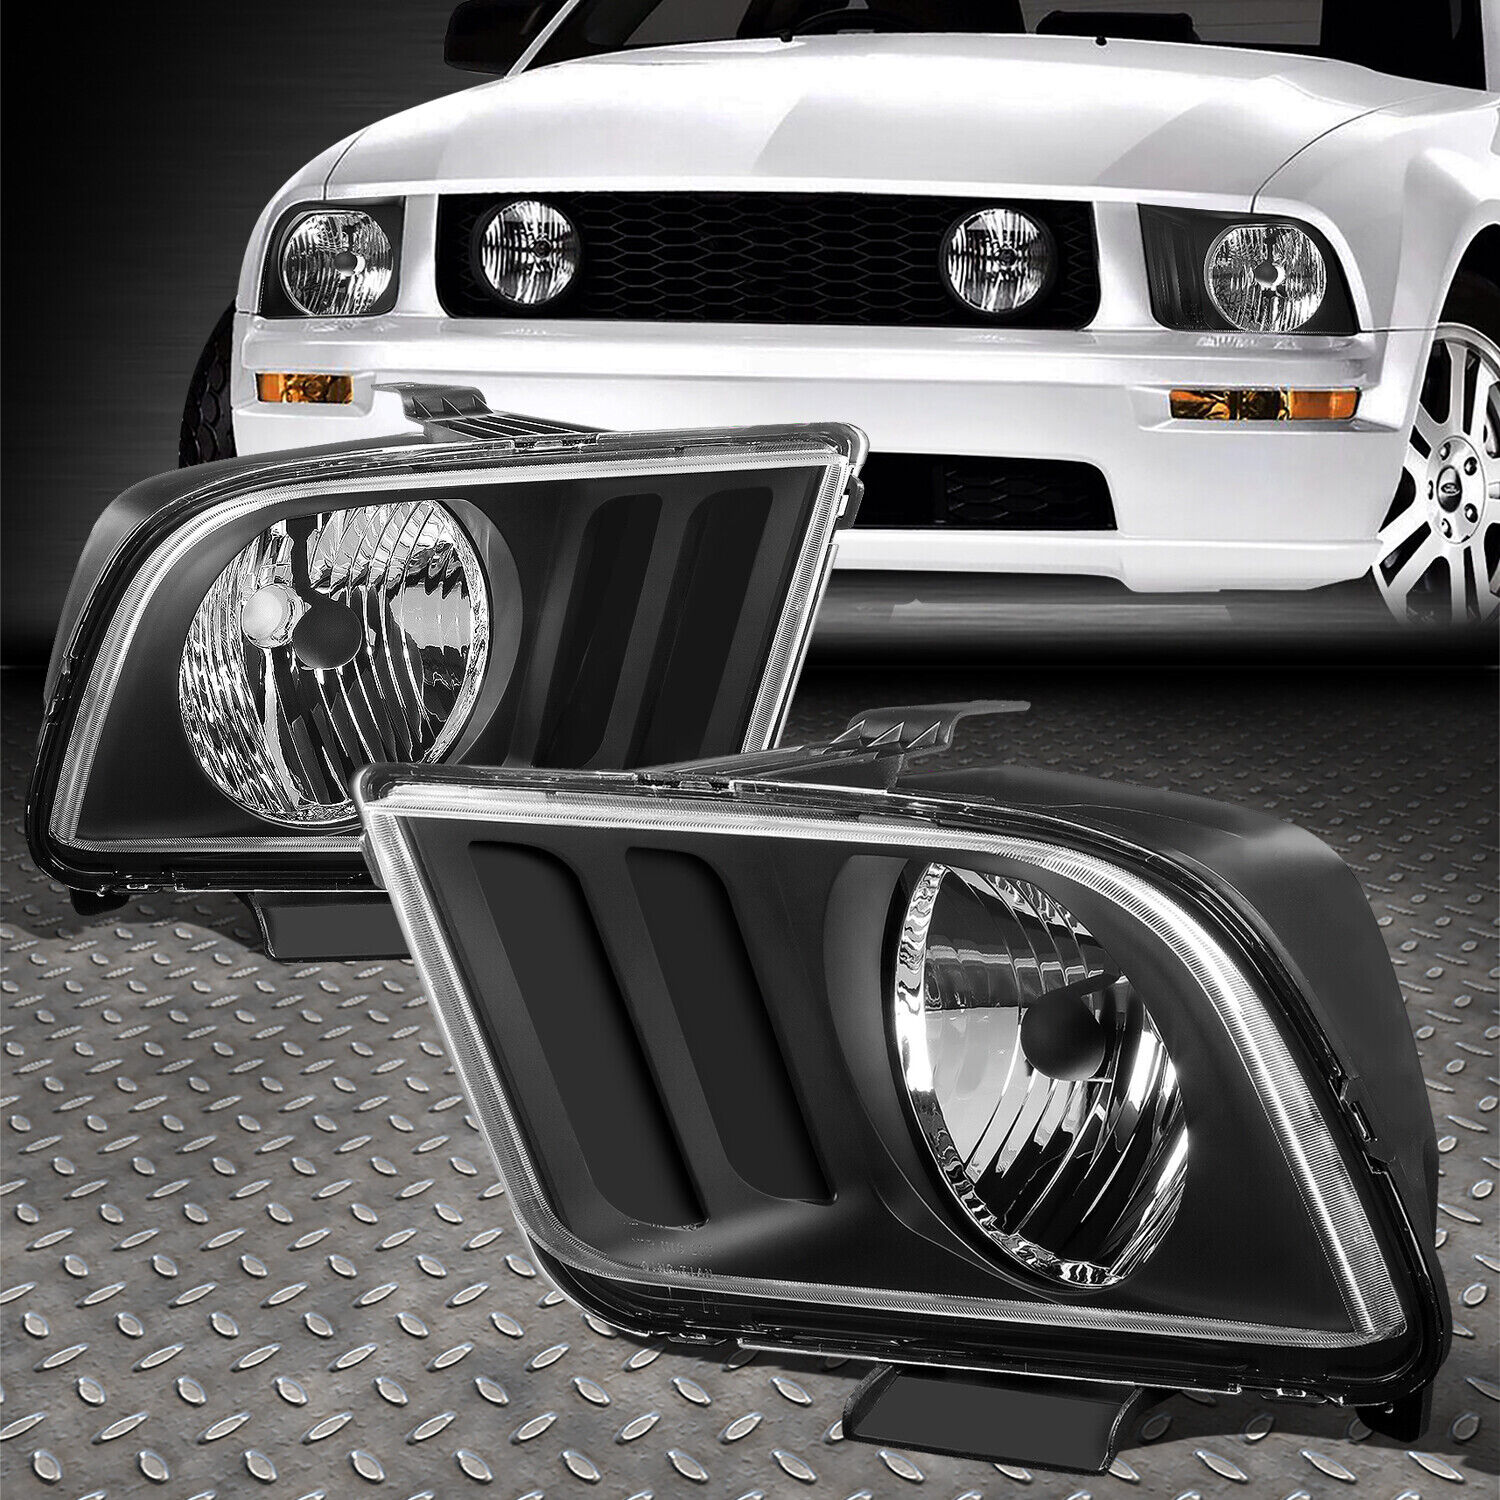 FOR 05-09 FORD MUSTANG S197 PAIR BLACK HOUSING HEADLIGHT REPLACEMENT HEAD LAMPS